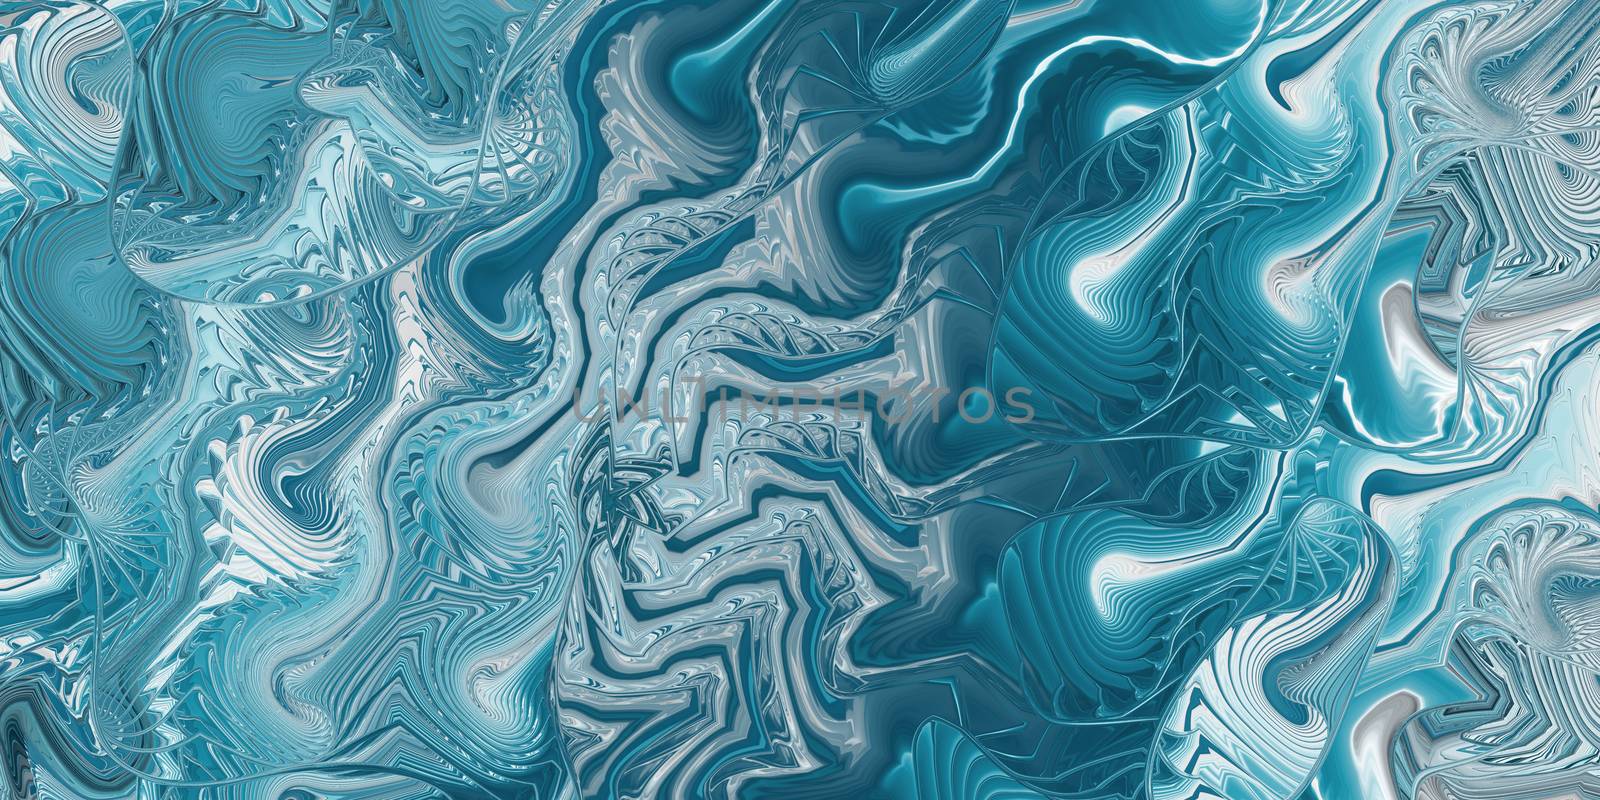 Light Blue Sea Swirls Background. Abstract Ocean Marbling Curves Texture. Nautical Spiral Shell Infinity Backdrop.